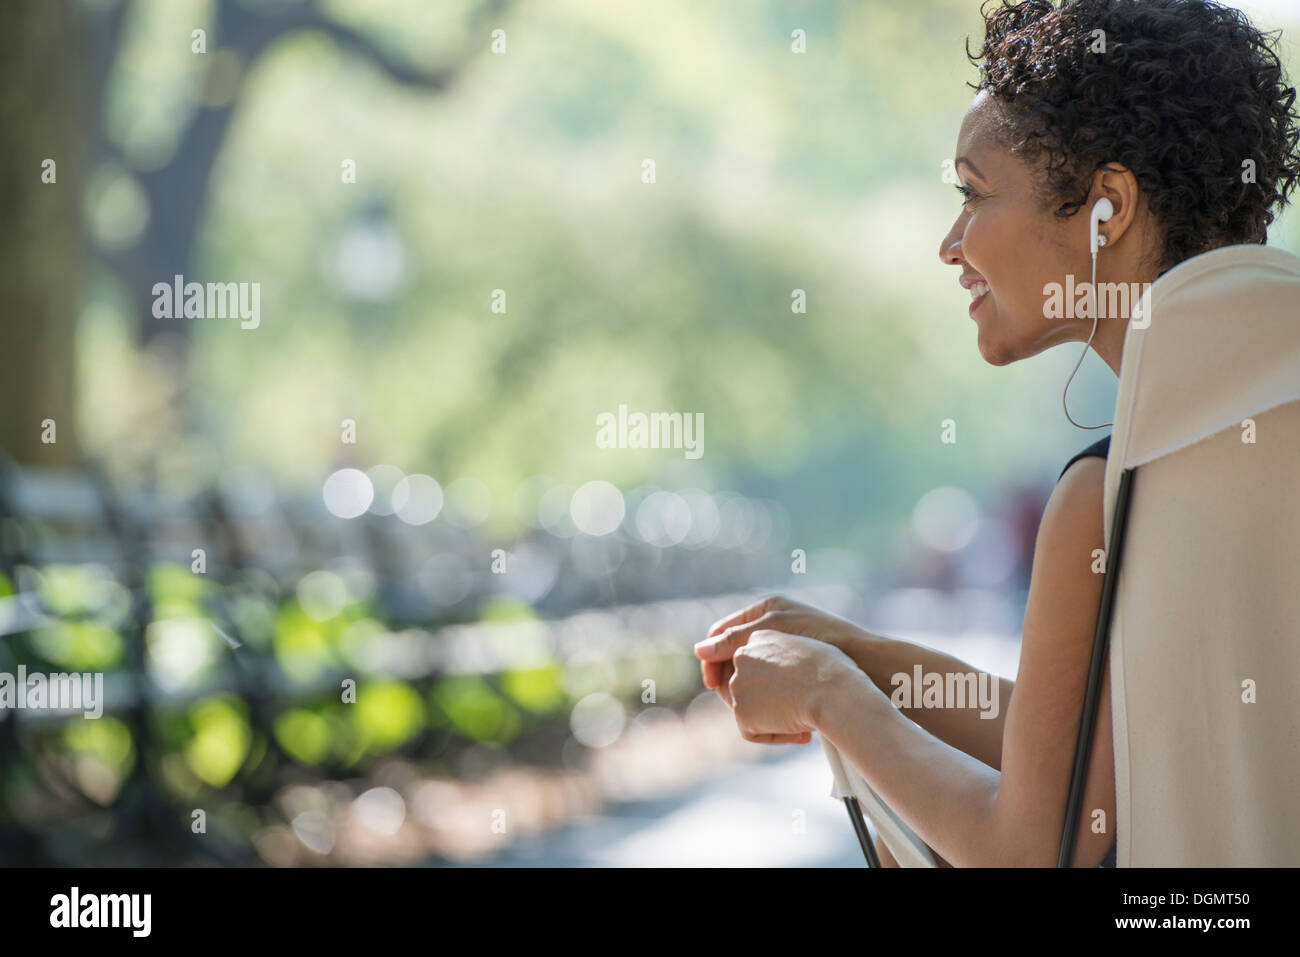 City life. A woman sitting in a camping chair in a city park. Stock Photo